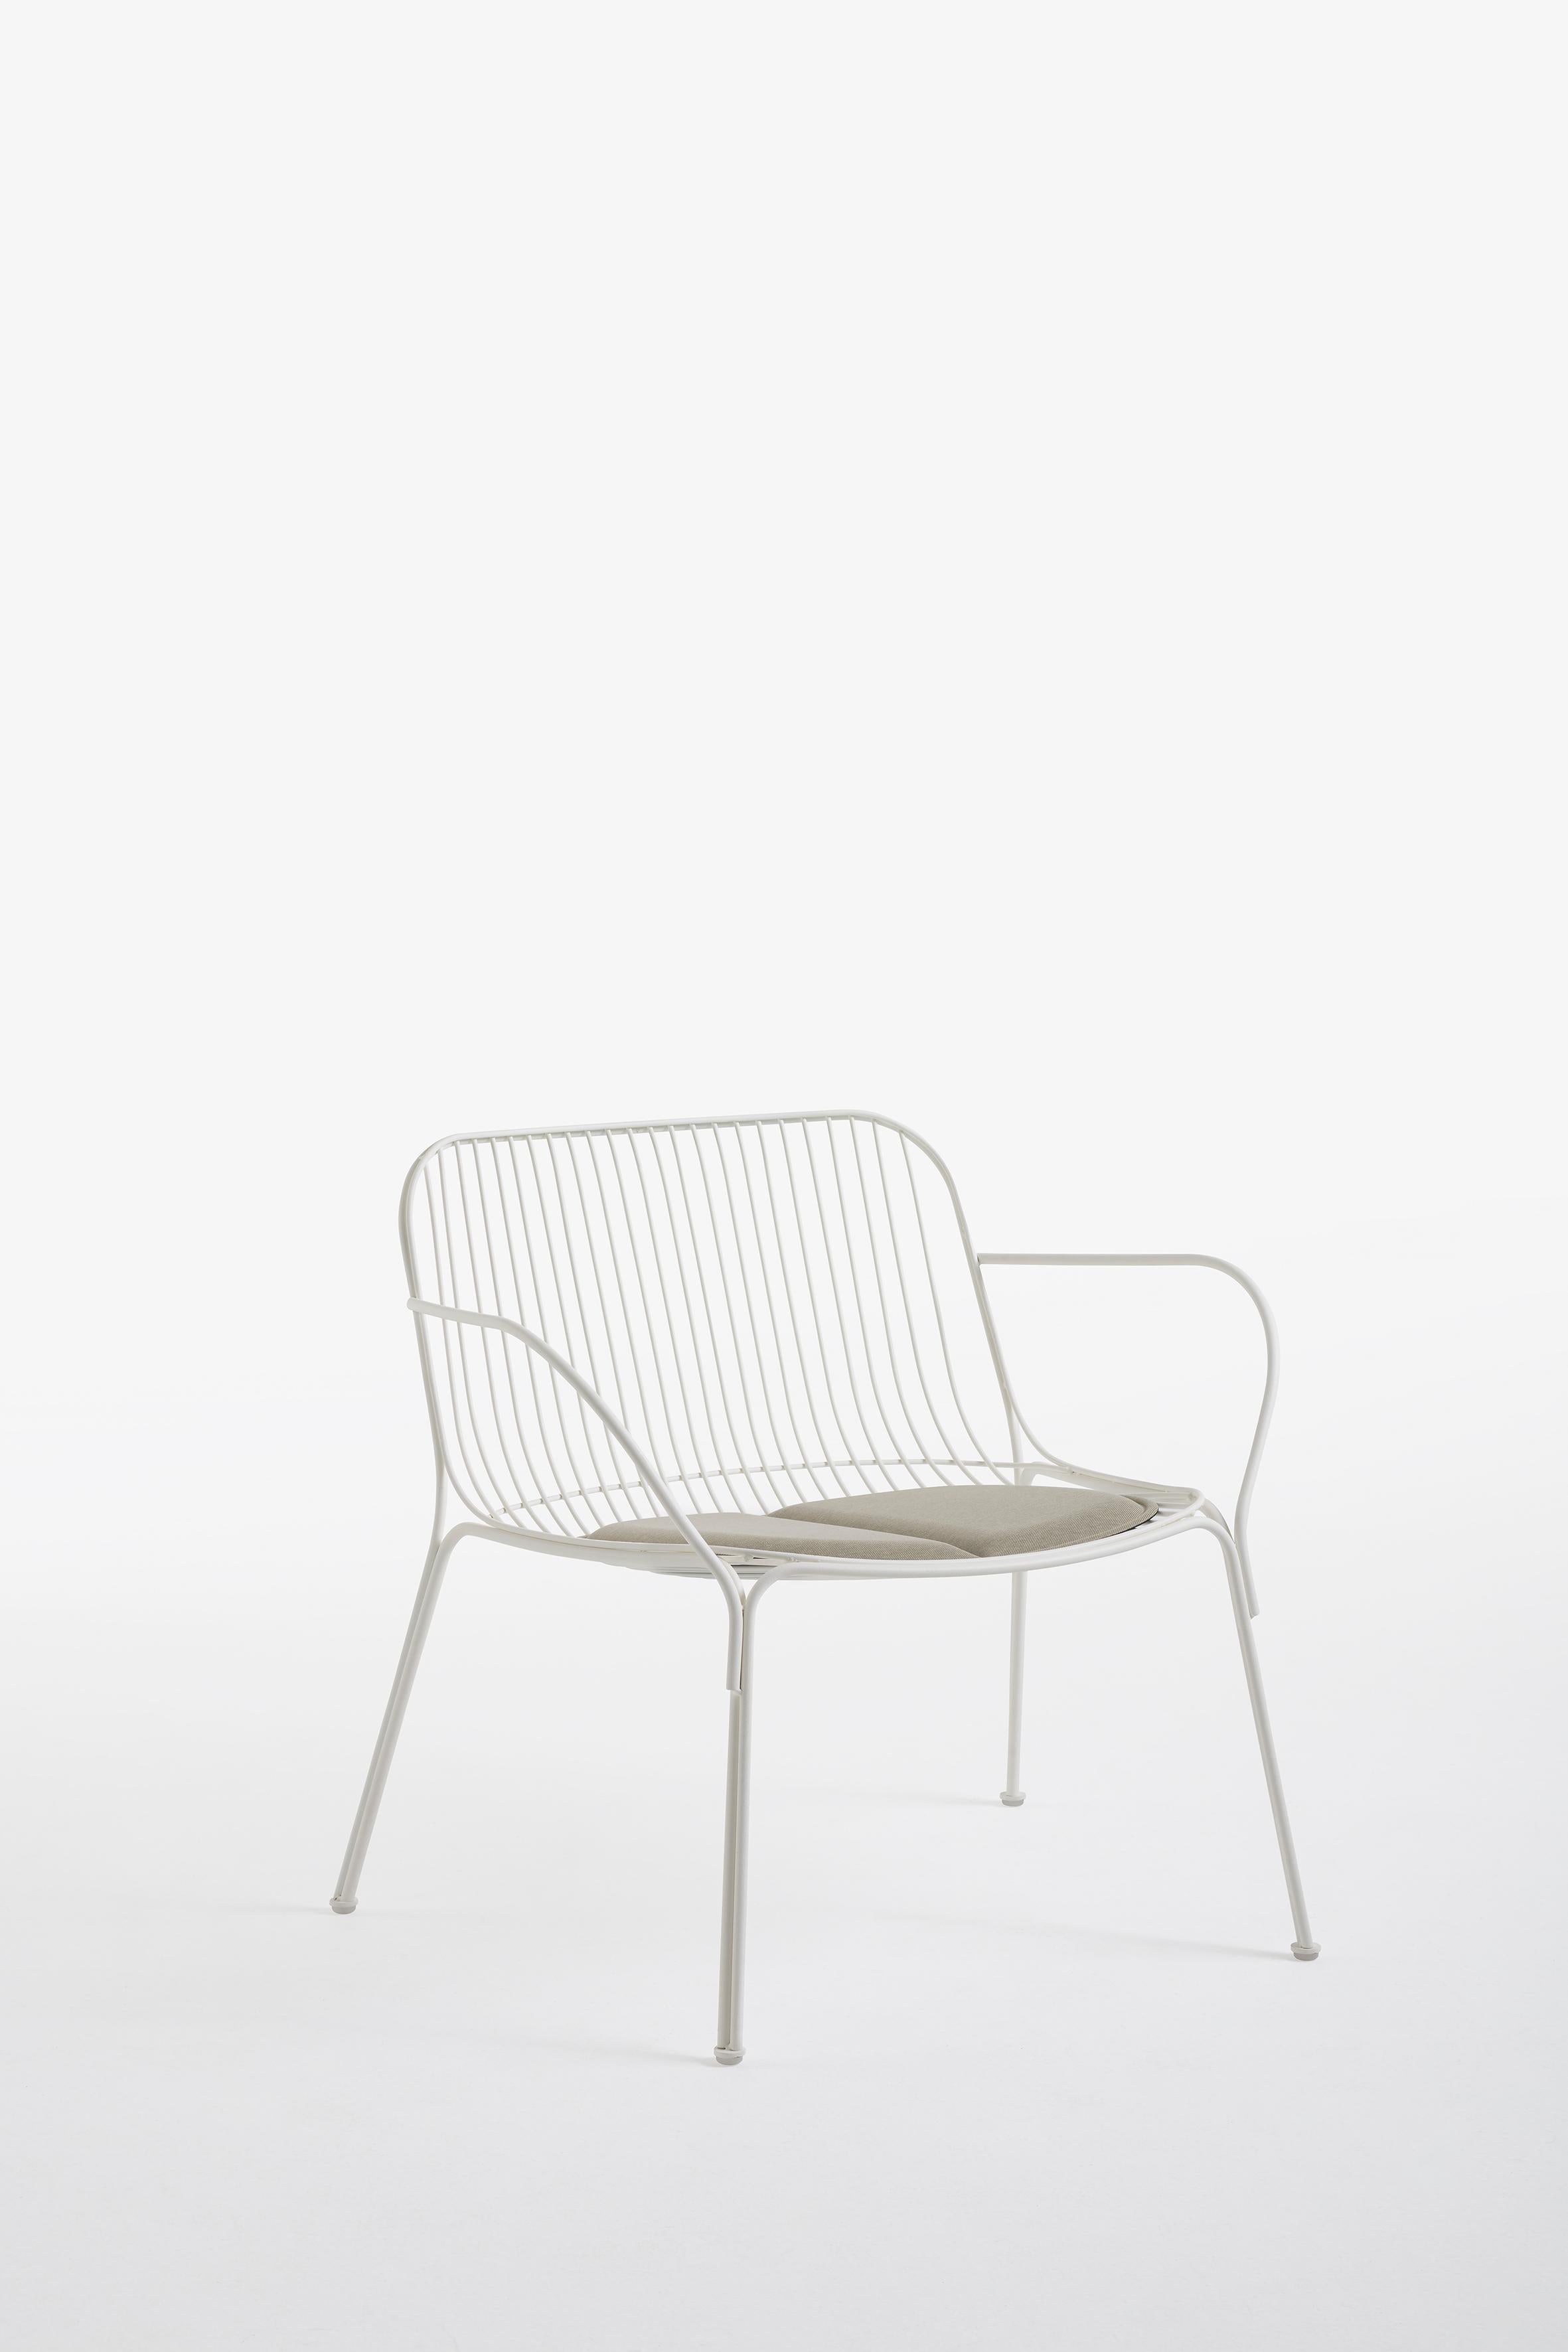 Kartell Hiray Armchair by Ludovica + Roberto Palomba In New Condition For Sale In Brooklyn, NY